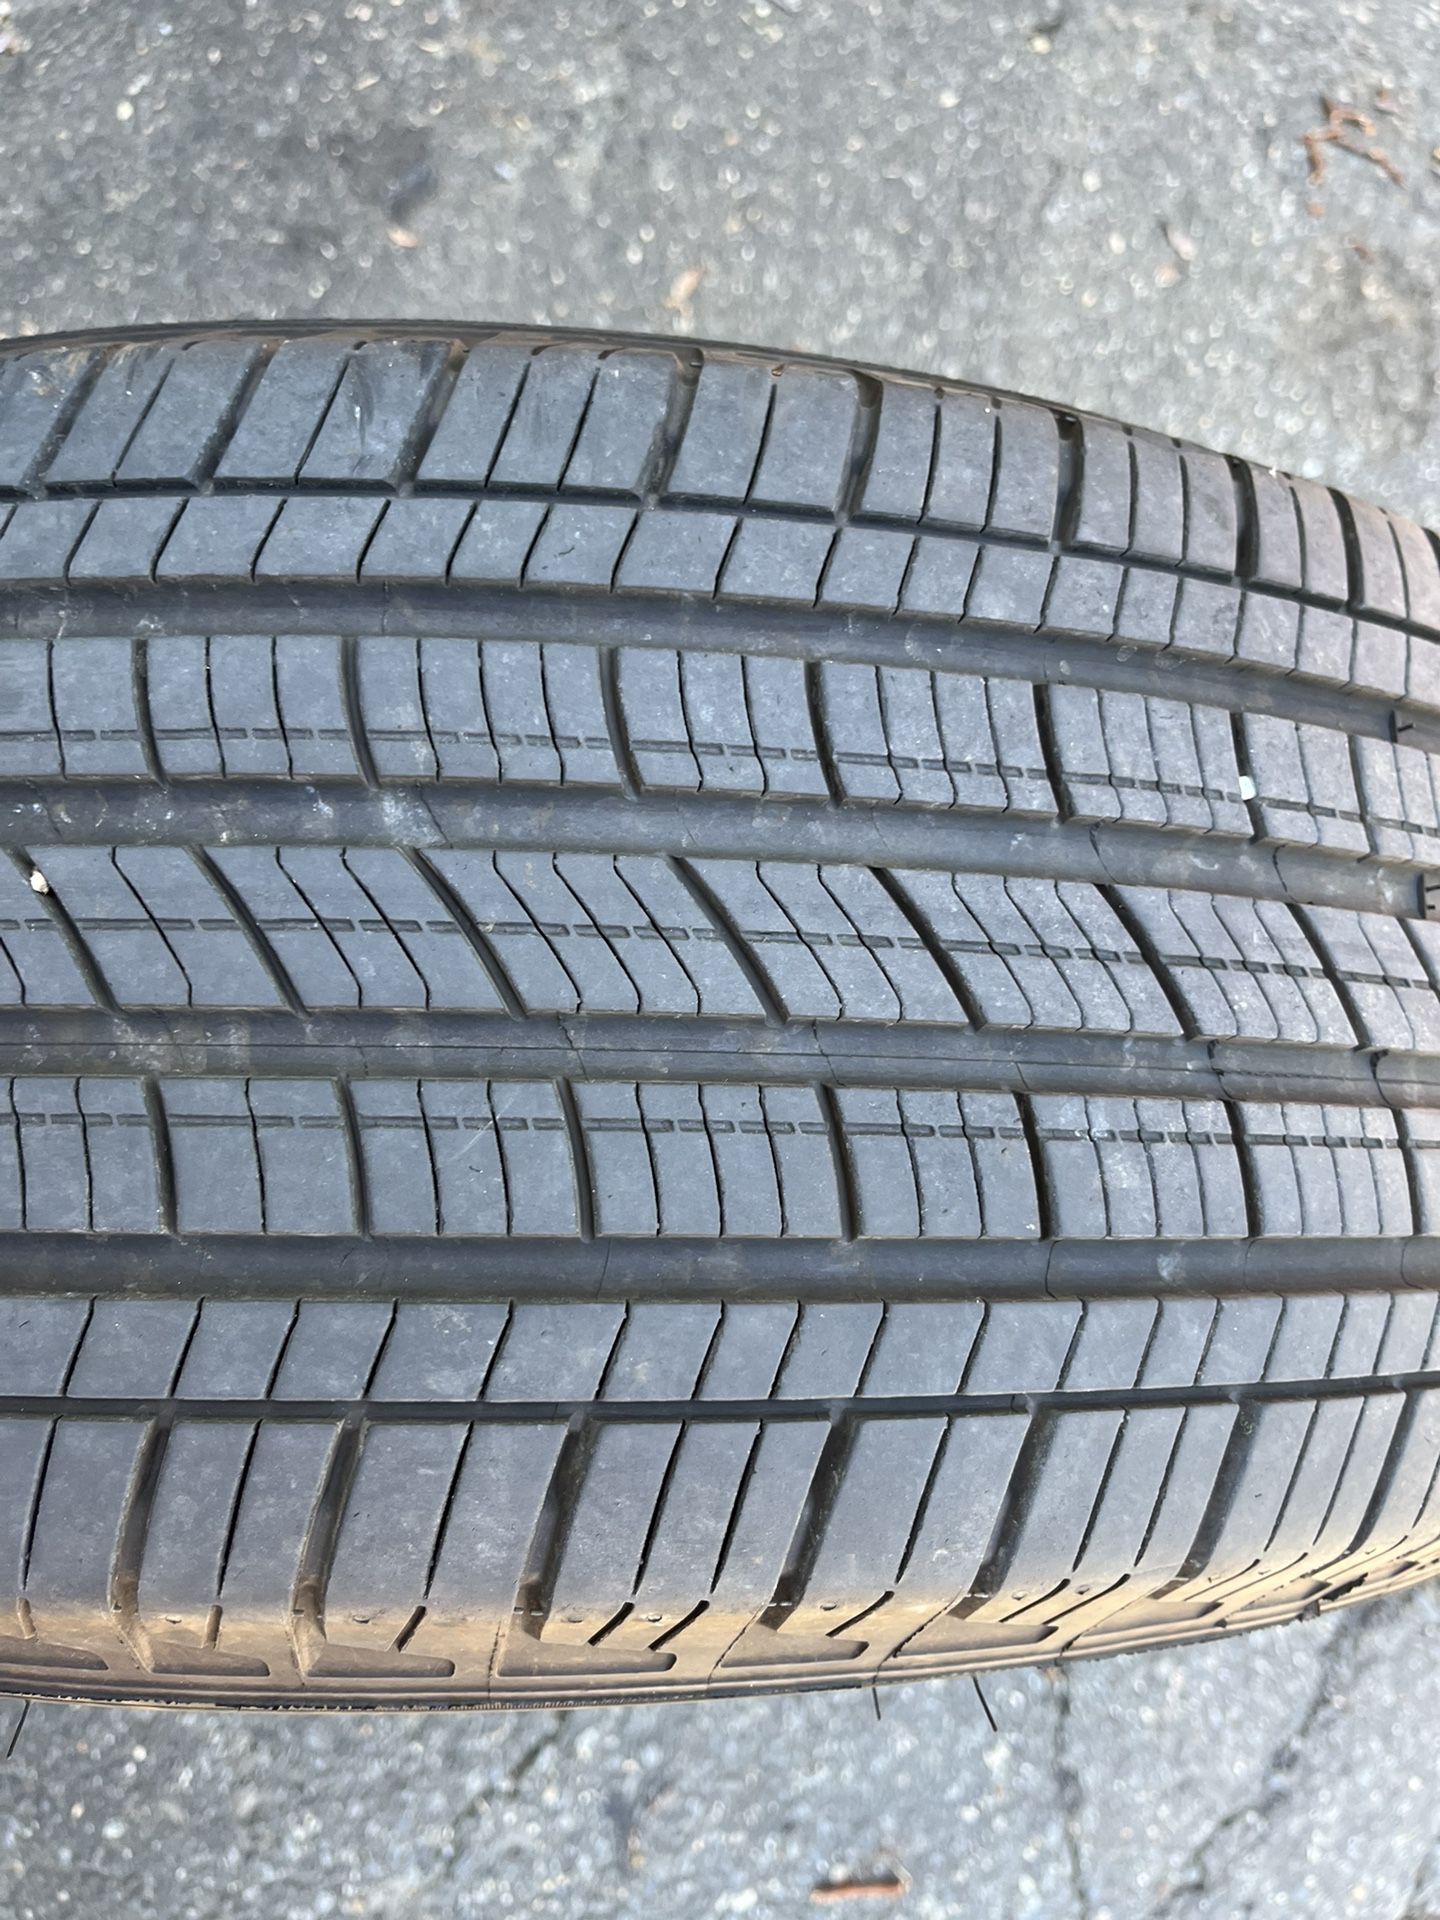 ONE USED TIRE 265/65R17 MICHELIN HAVE PARCH INTALLATION AND BALANCING $45 Cash Only 